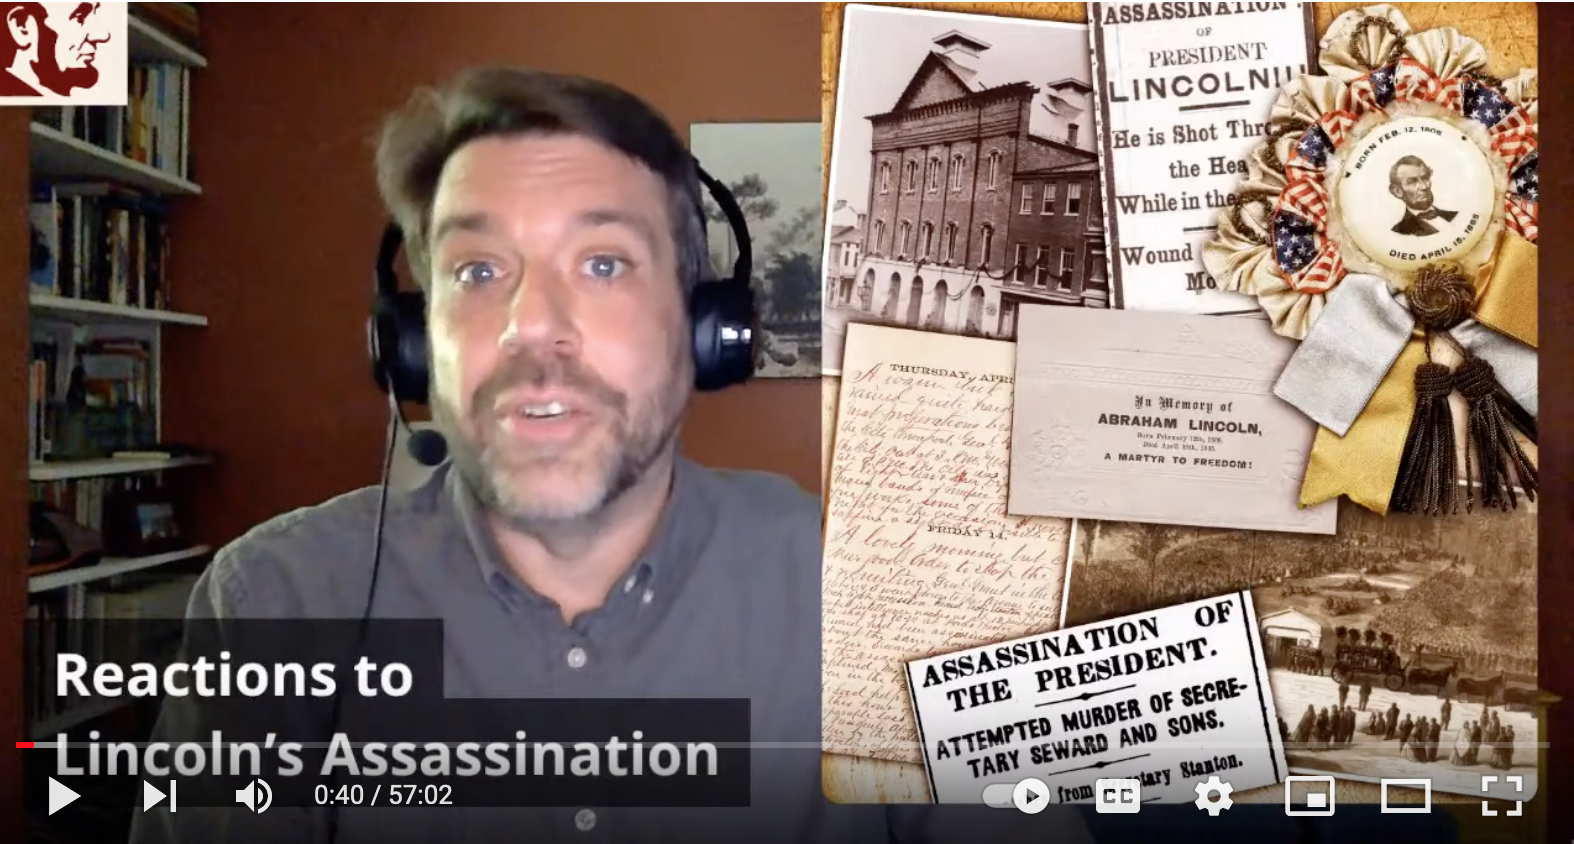 A man with a beard, wearing a headset, on a YouTube video. Text says "Reactions to Lincoln's Assassination," with a collage of historic images to the right of the man.